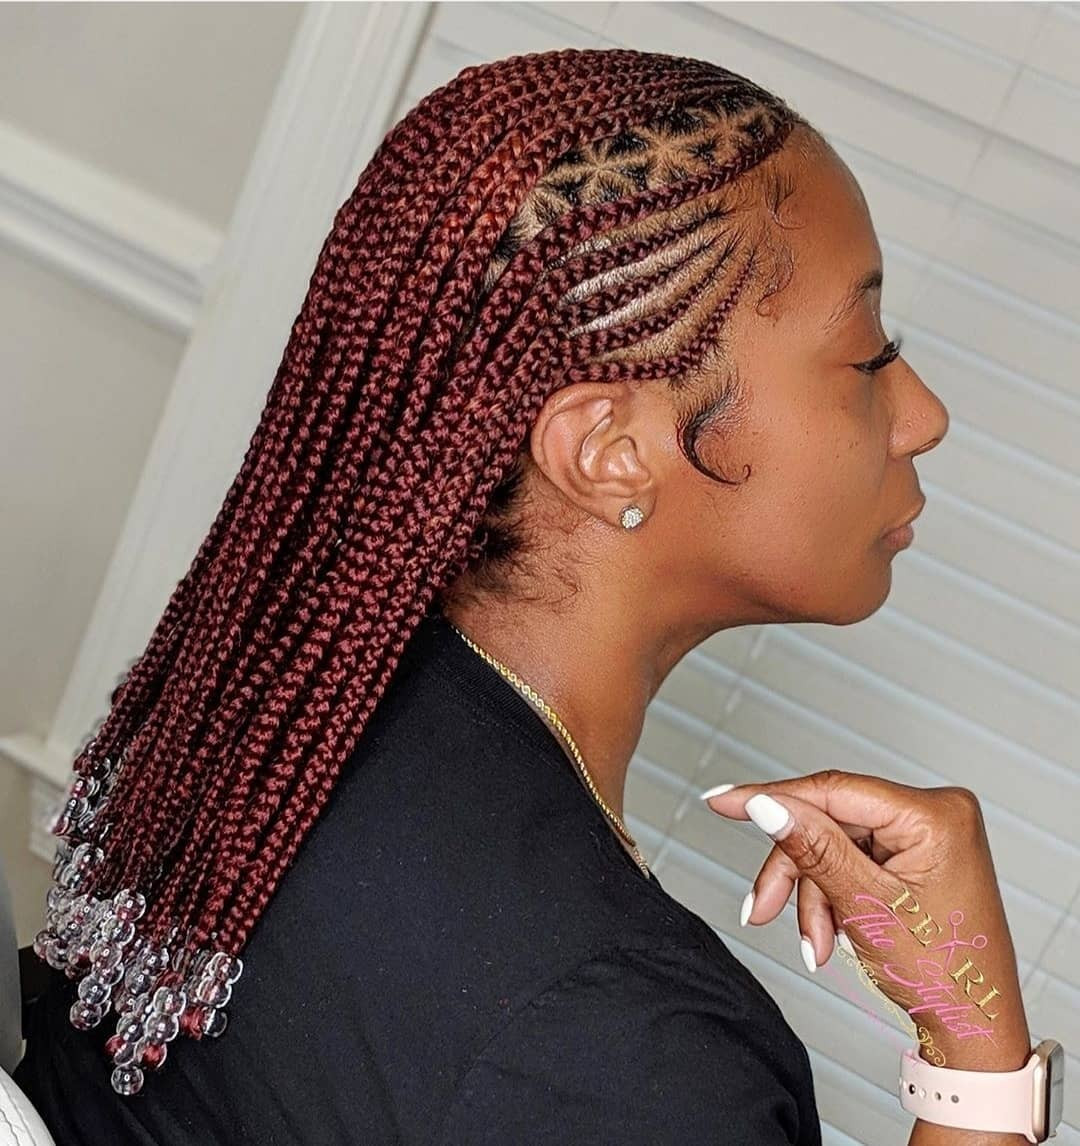 Braid Hairstyles 2020
 2020 Braided Hairstyles That Are Totally Hip and Cute